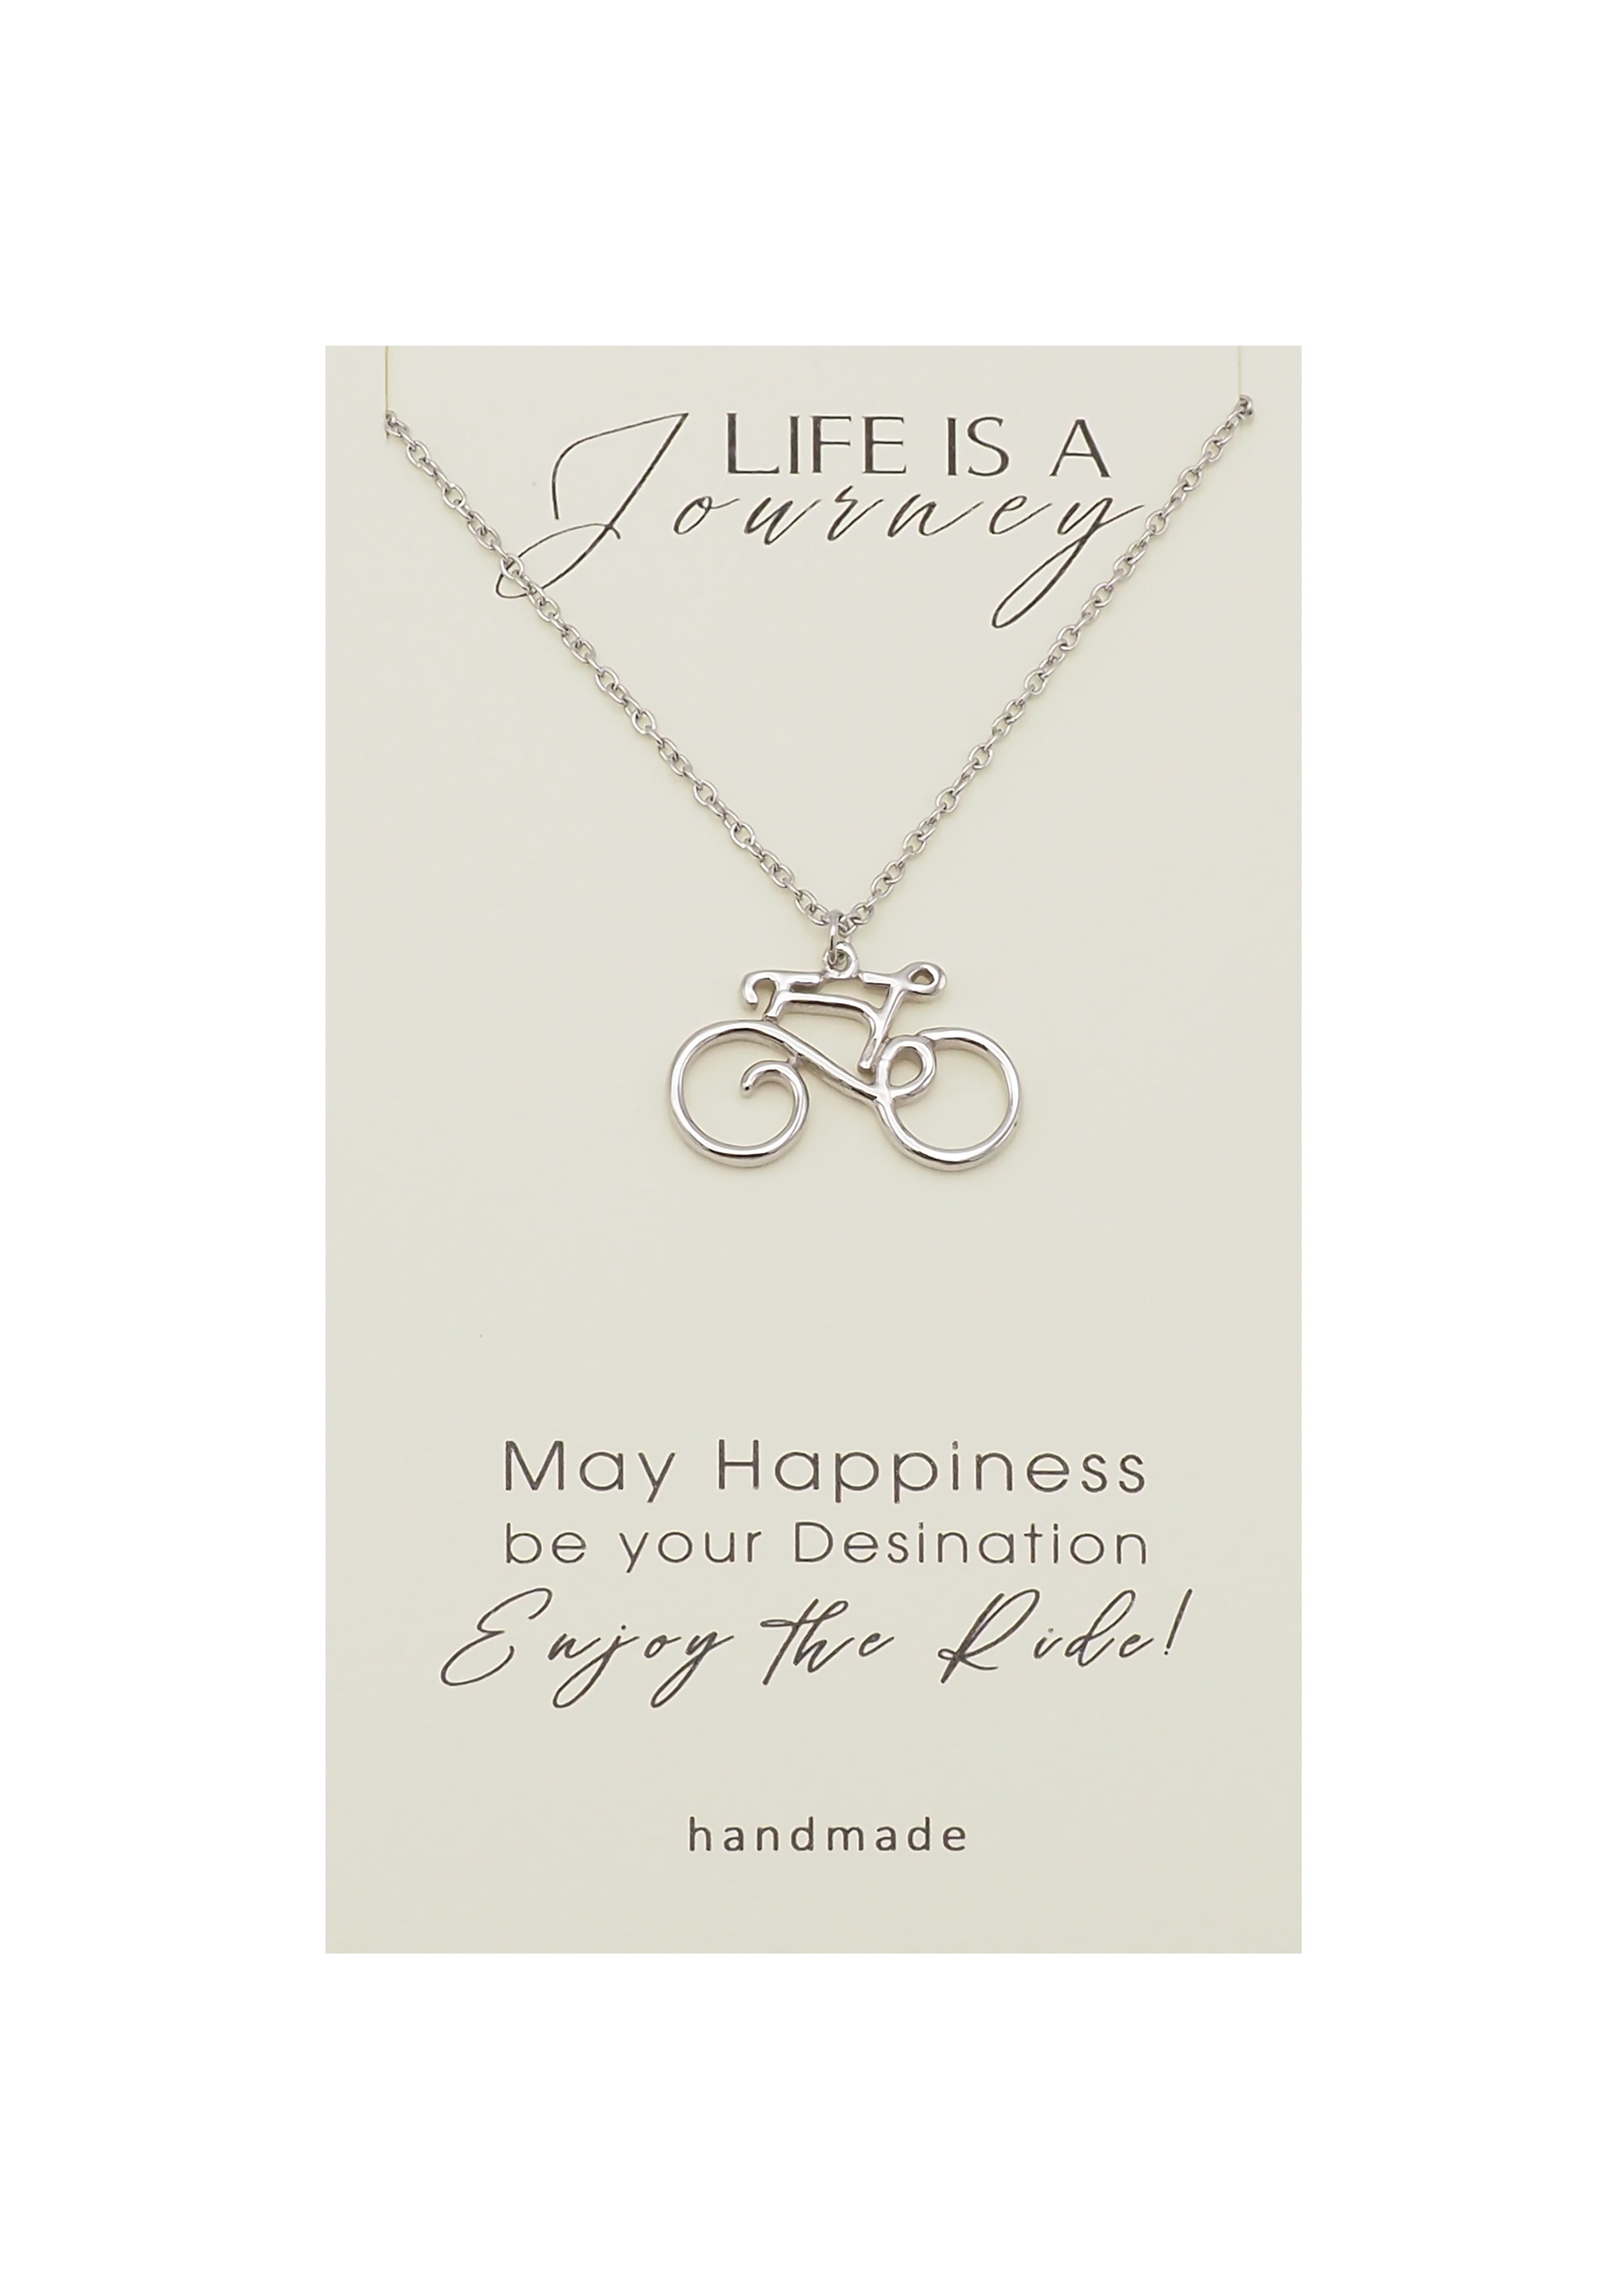 Joyfulle Sadella Bicycle Pendant Necklace, Handmade Gifts with Inspirational Quotes on Greeting Card